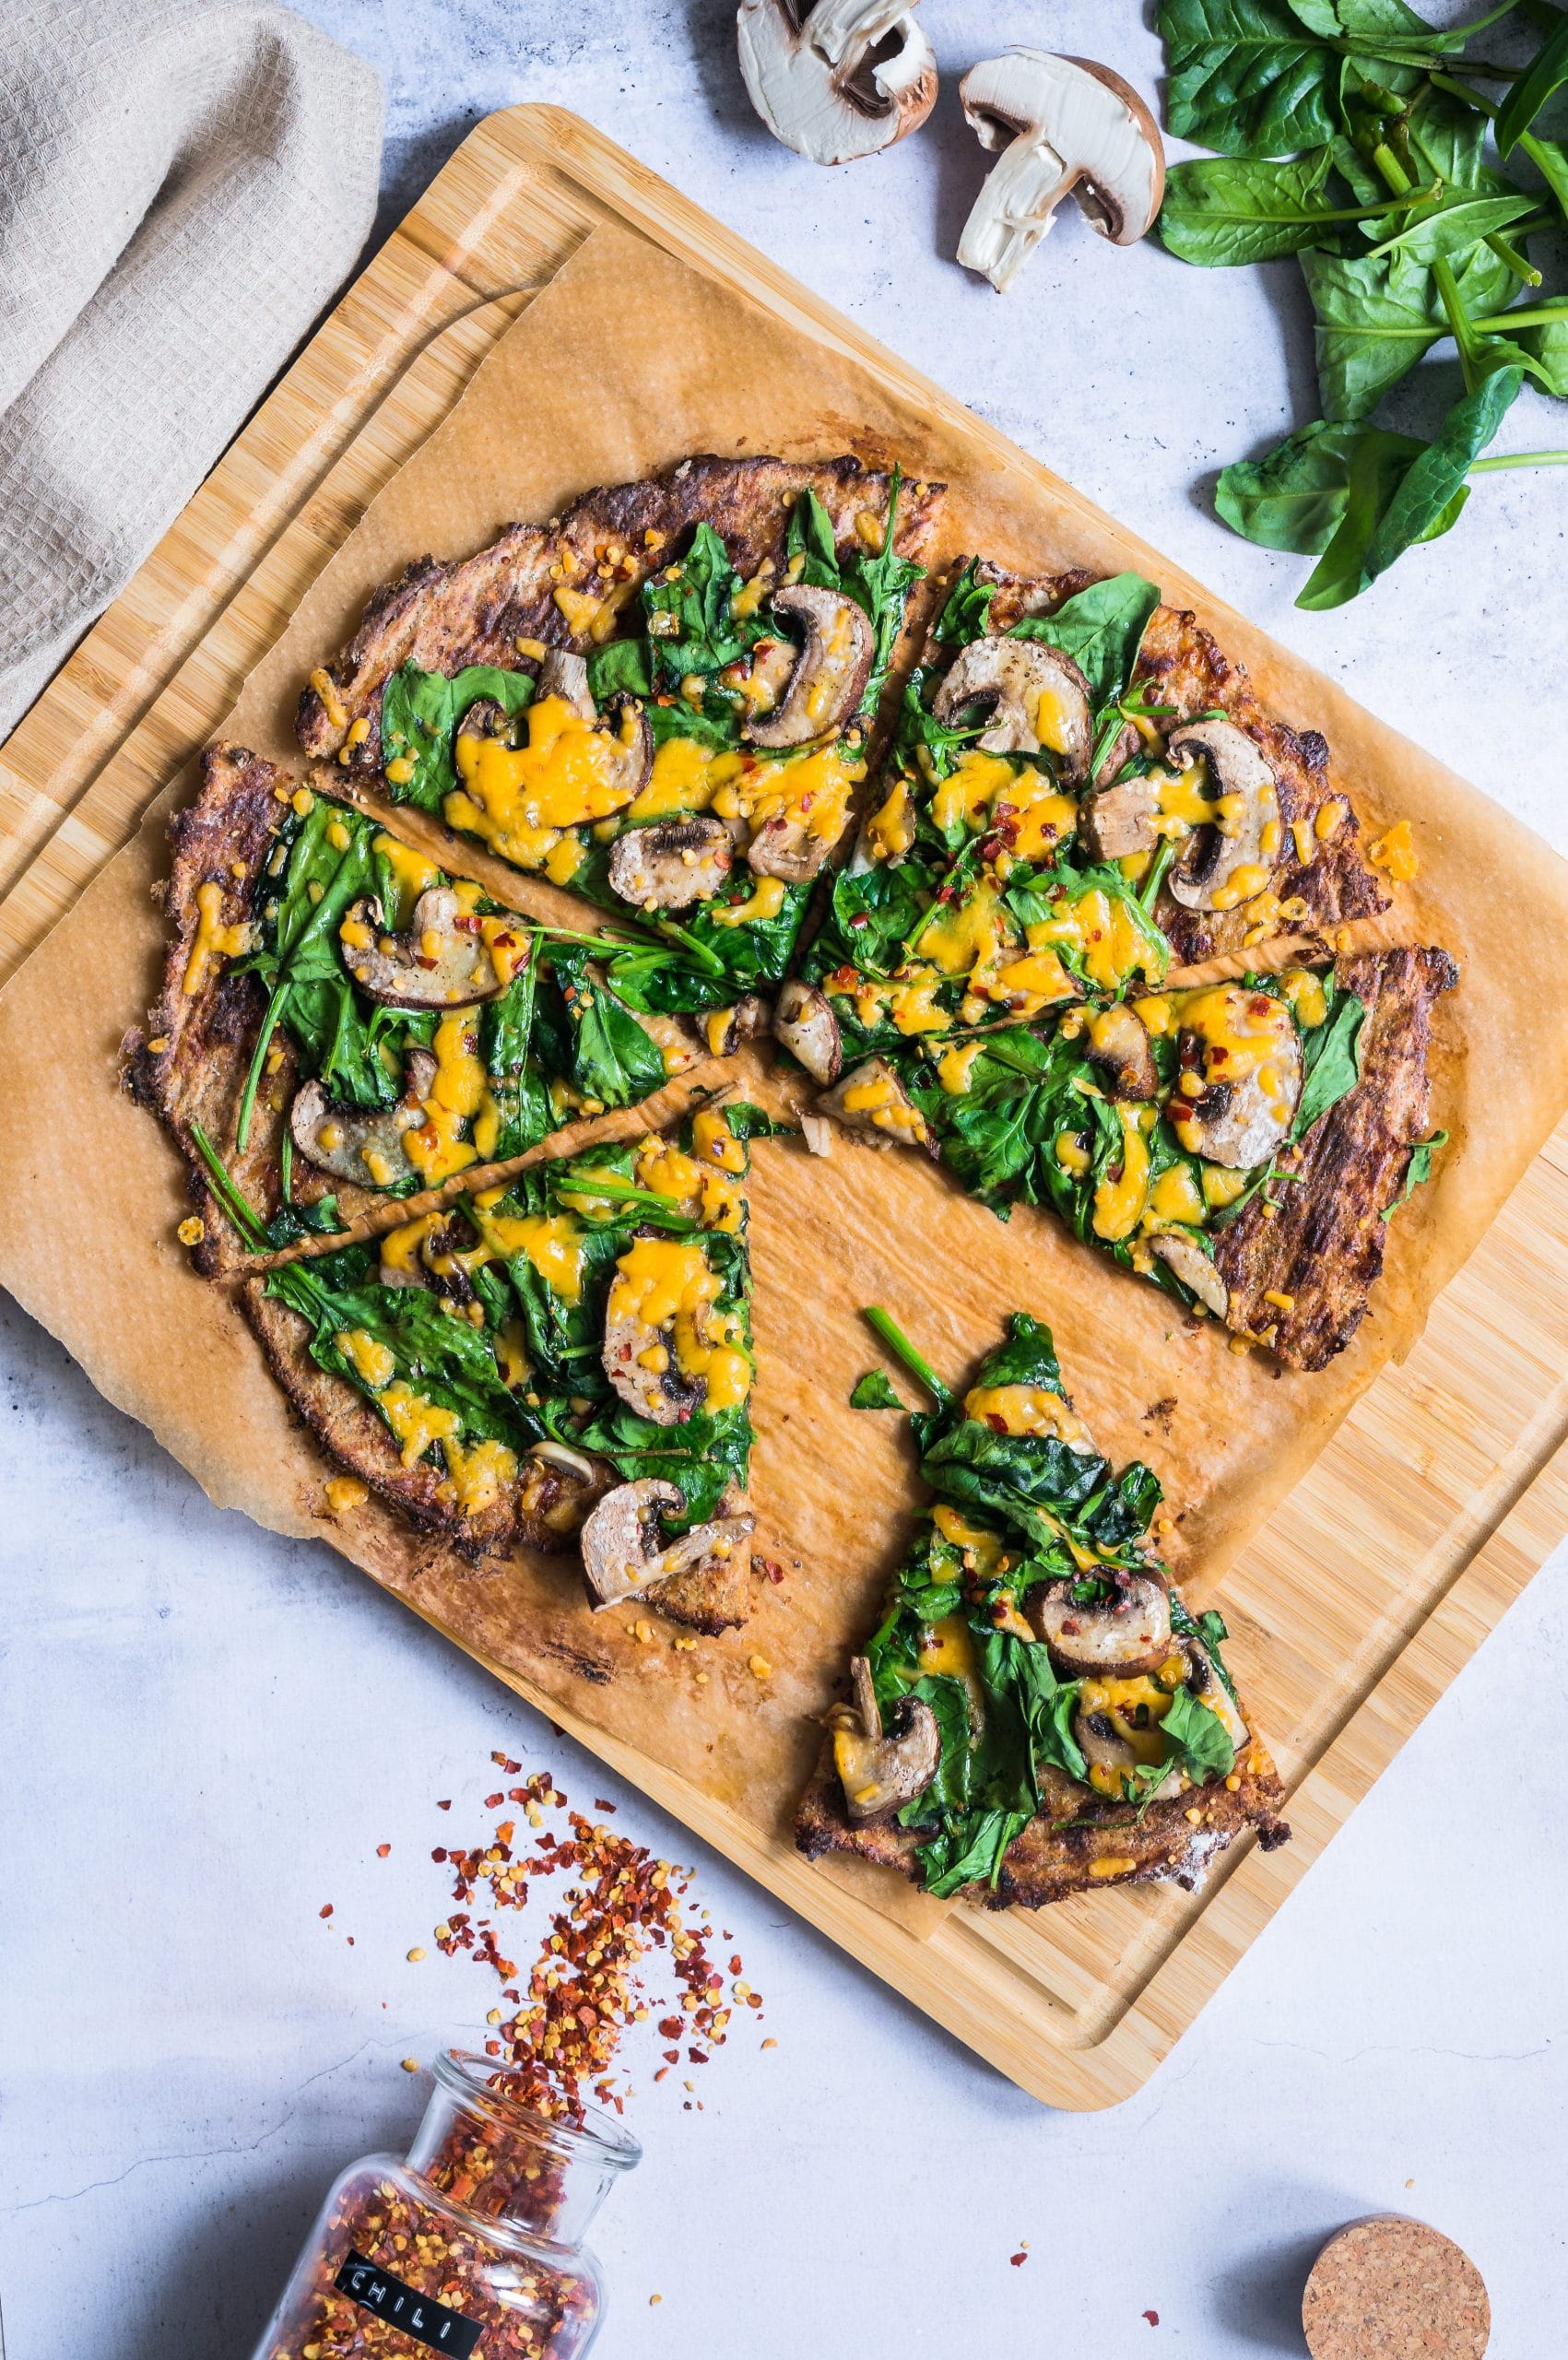 Cauliflower Galette with Spinach and Mushroom